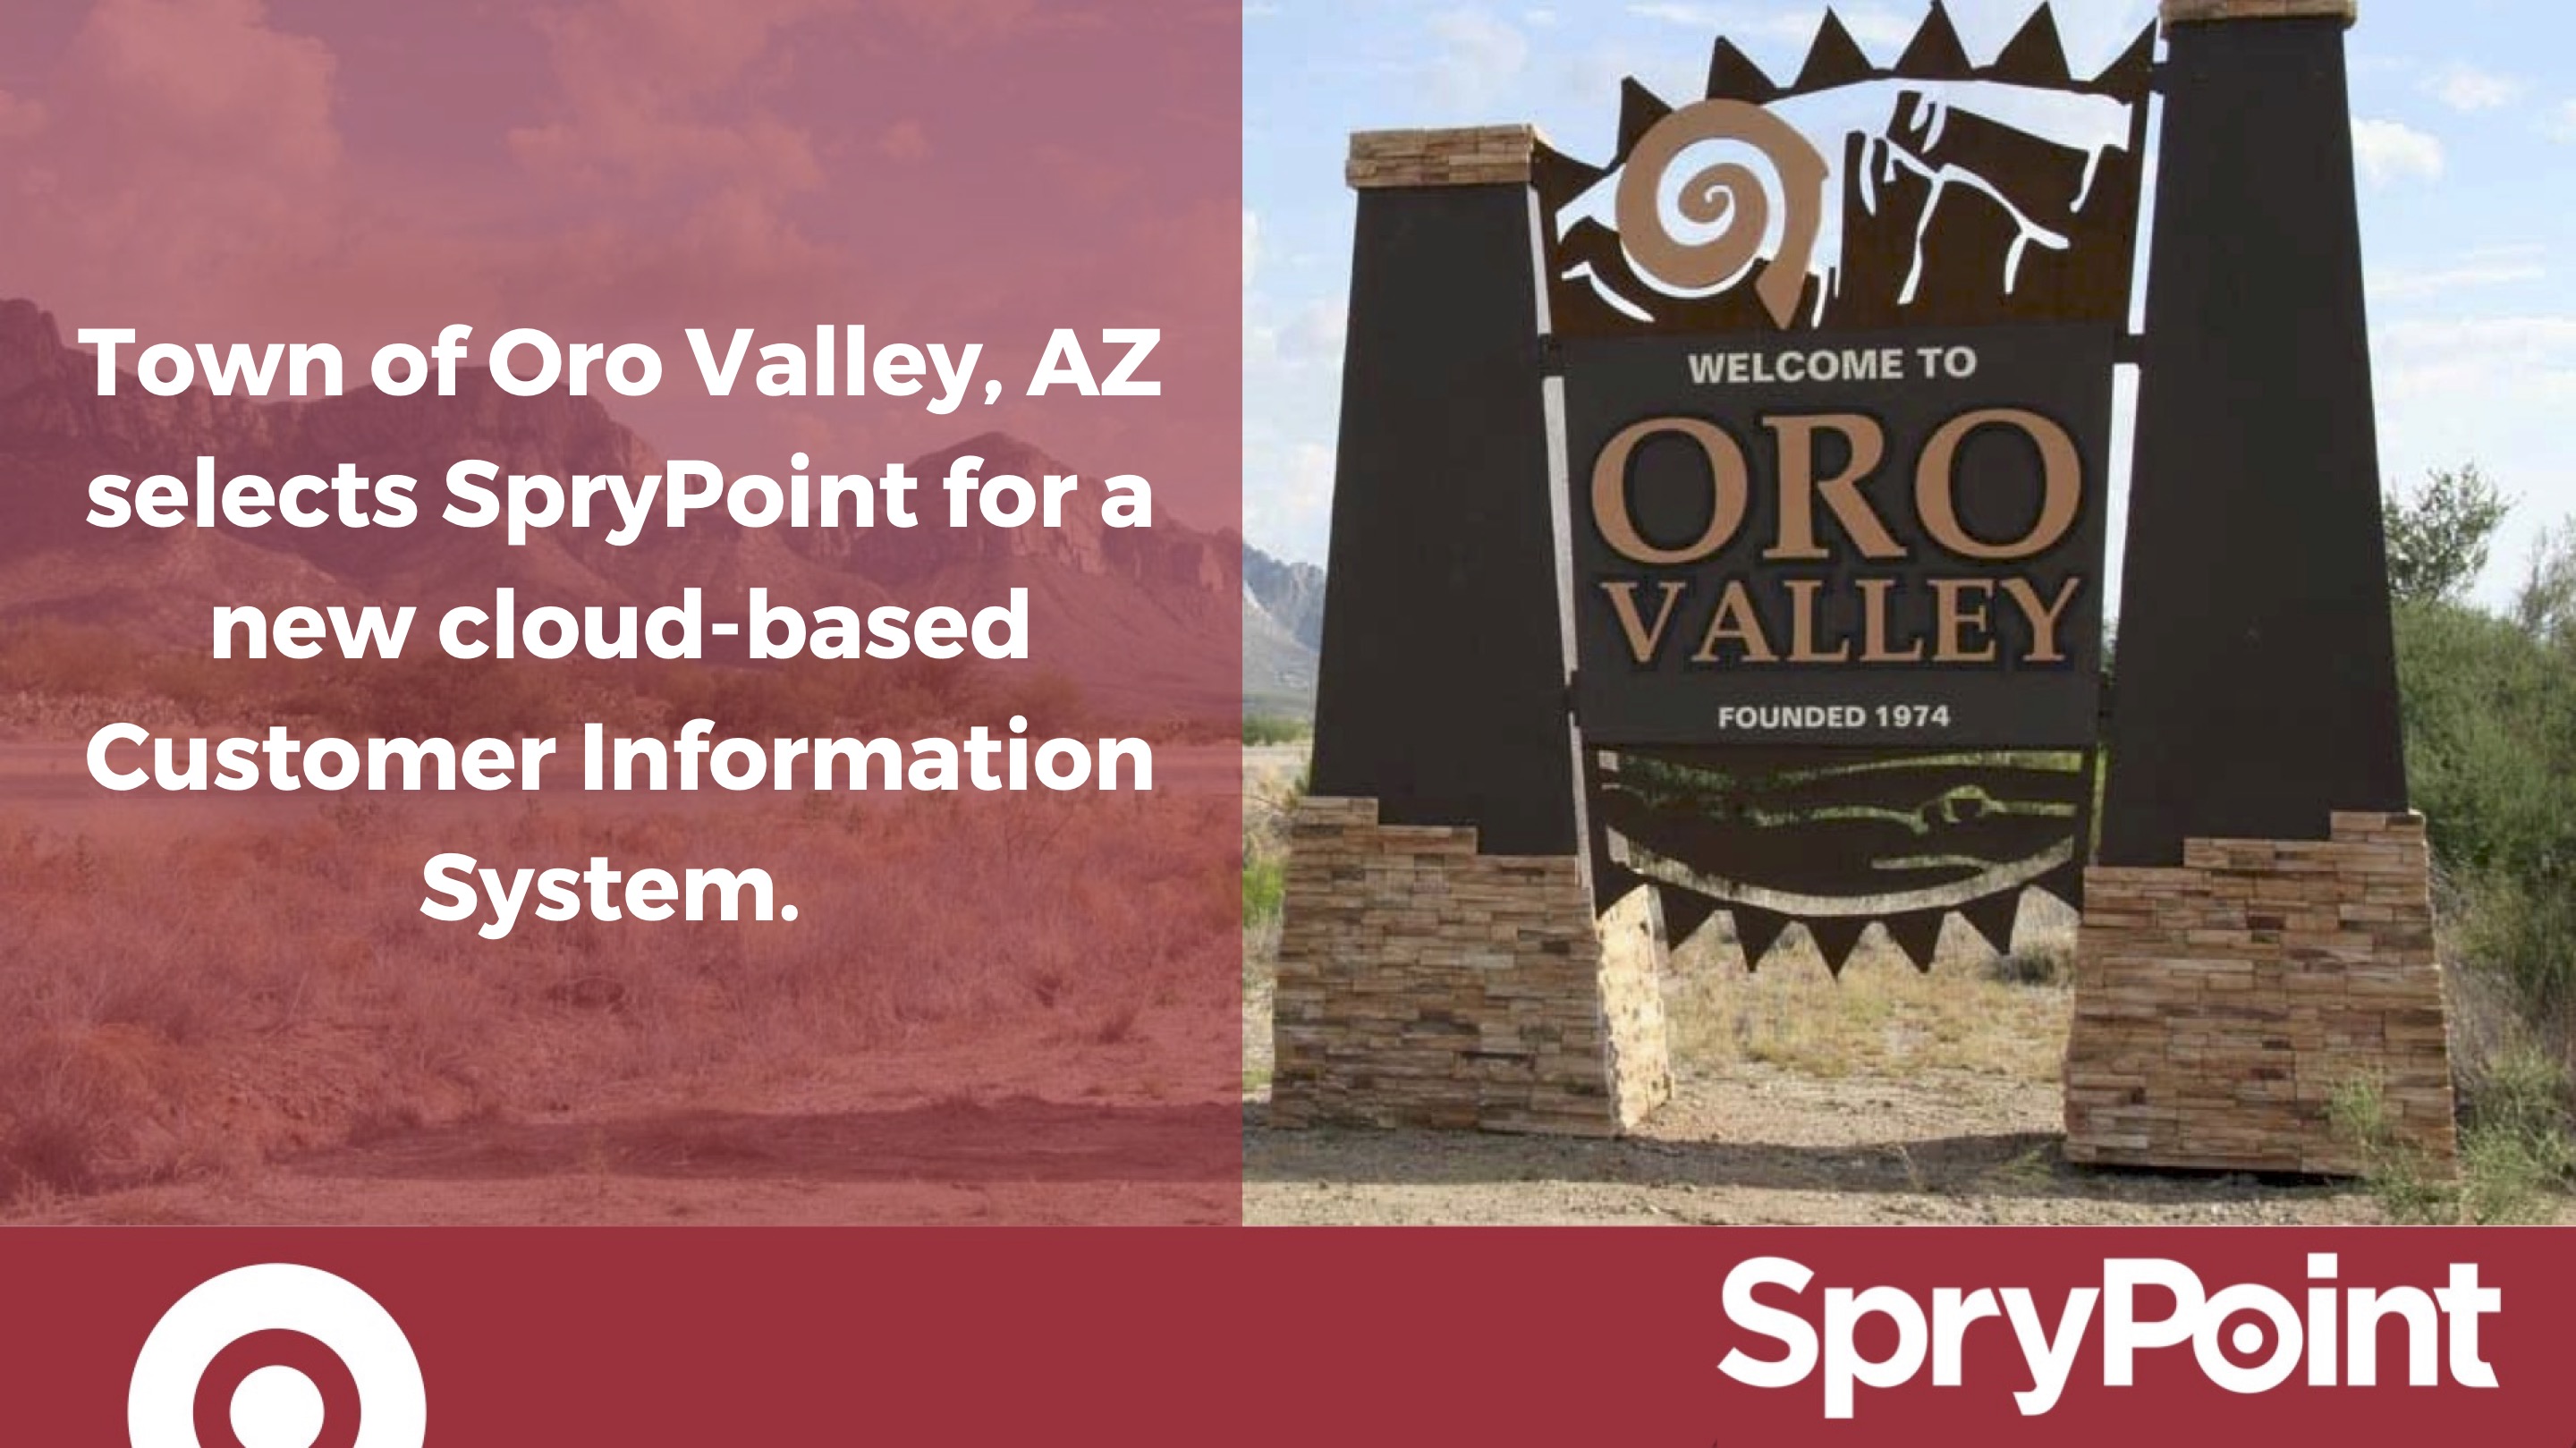 Town of Oro Valley, AZ selects SpryPoint for a new cloud-based Customer Information System.